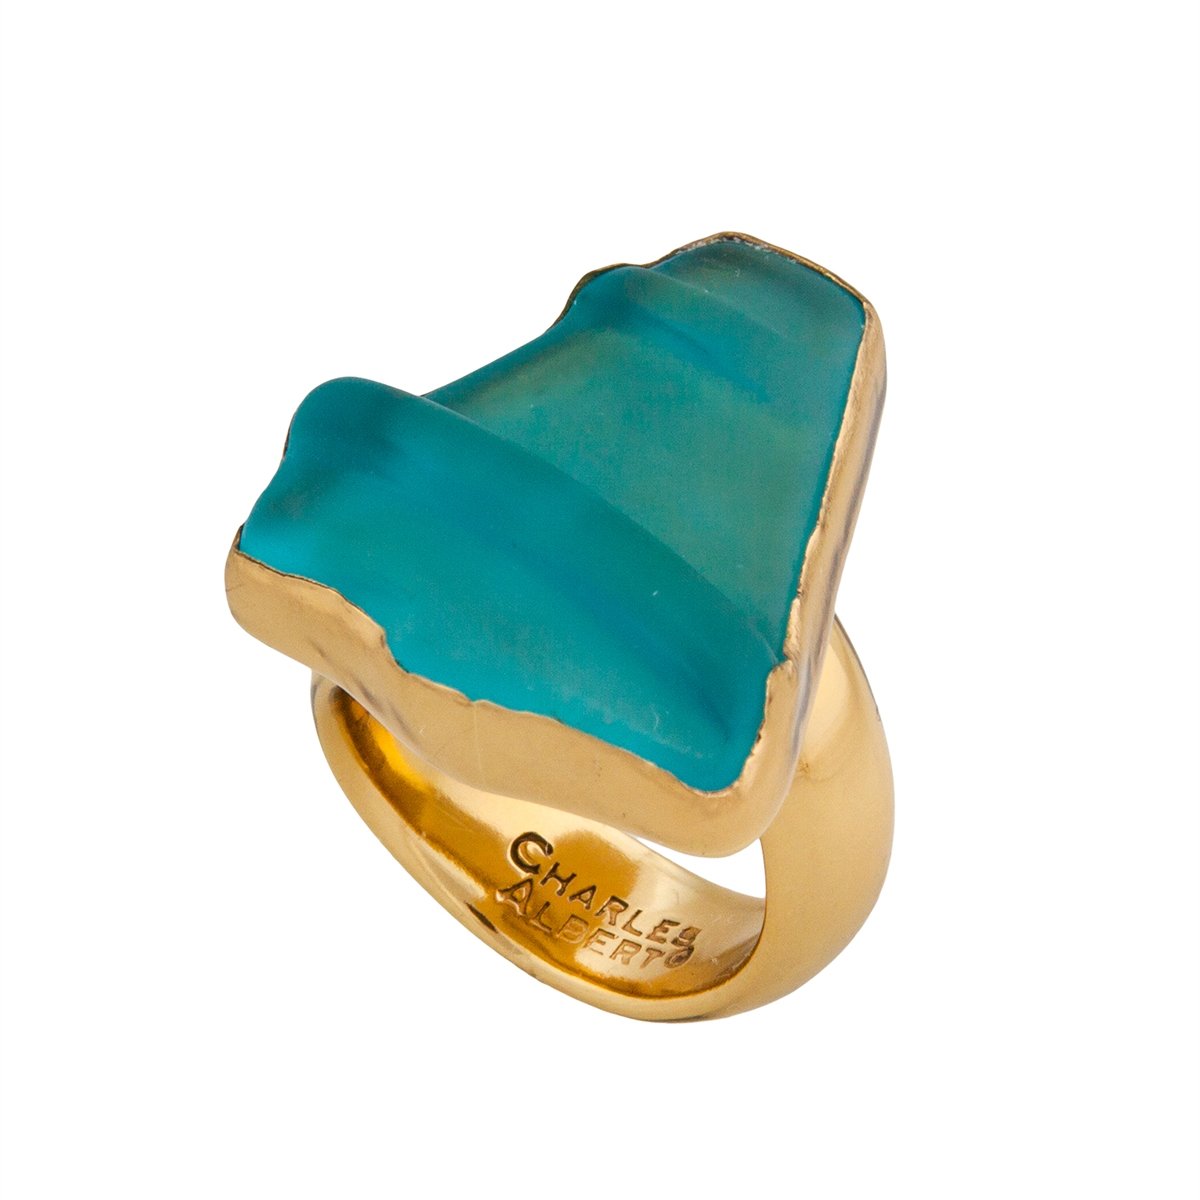 Charles Albert Jewelry - Alchemia Aqua Recycled Glass Adjustable Ring - Side View